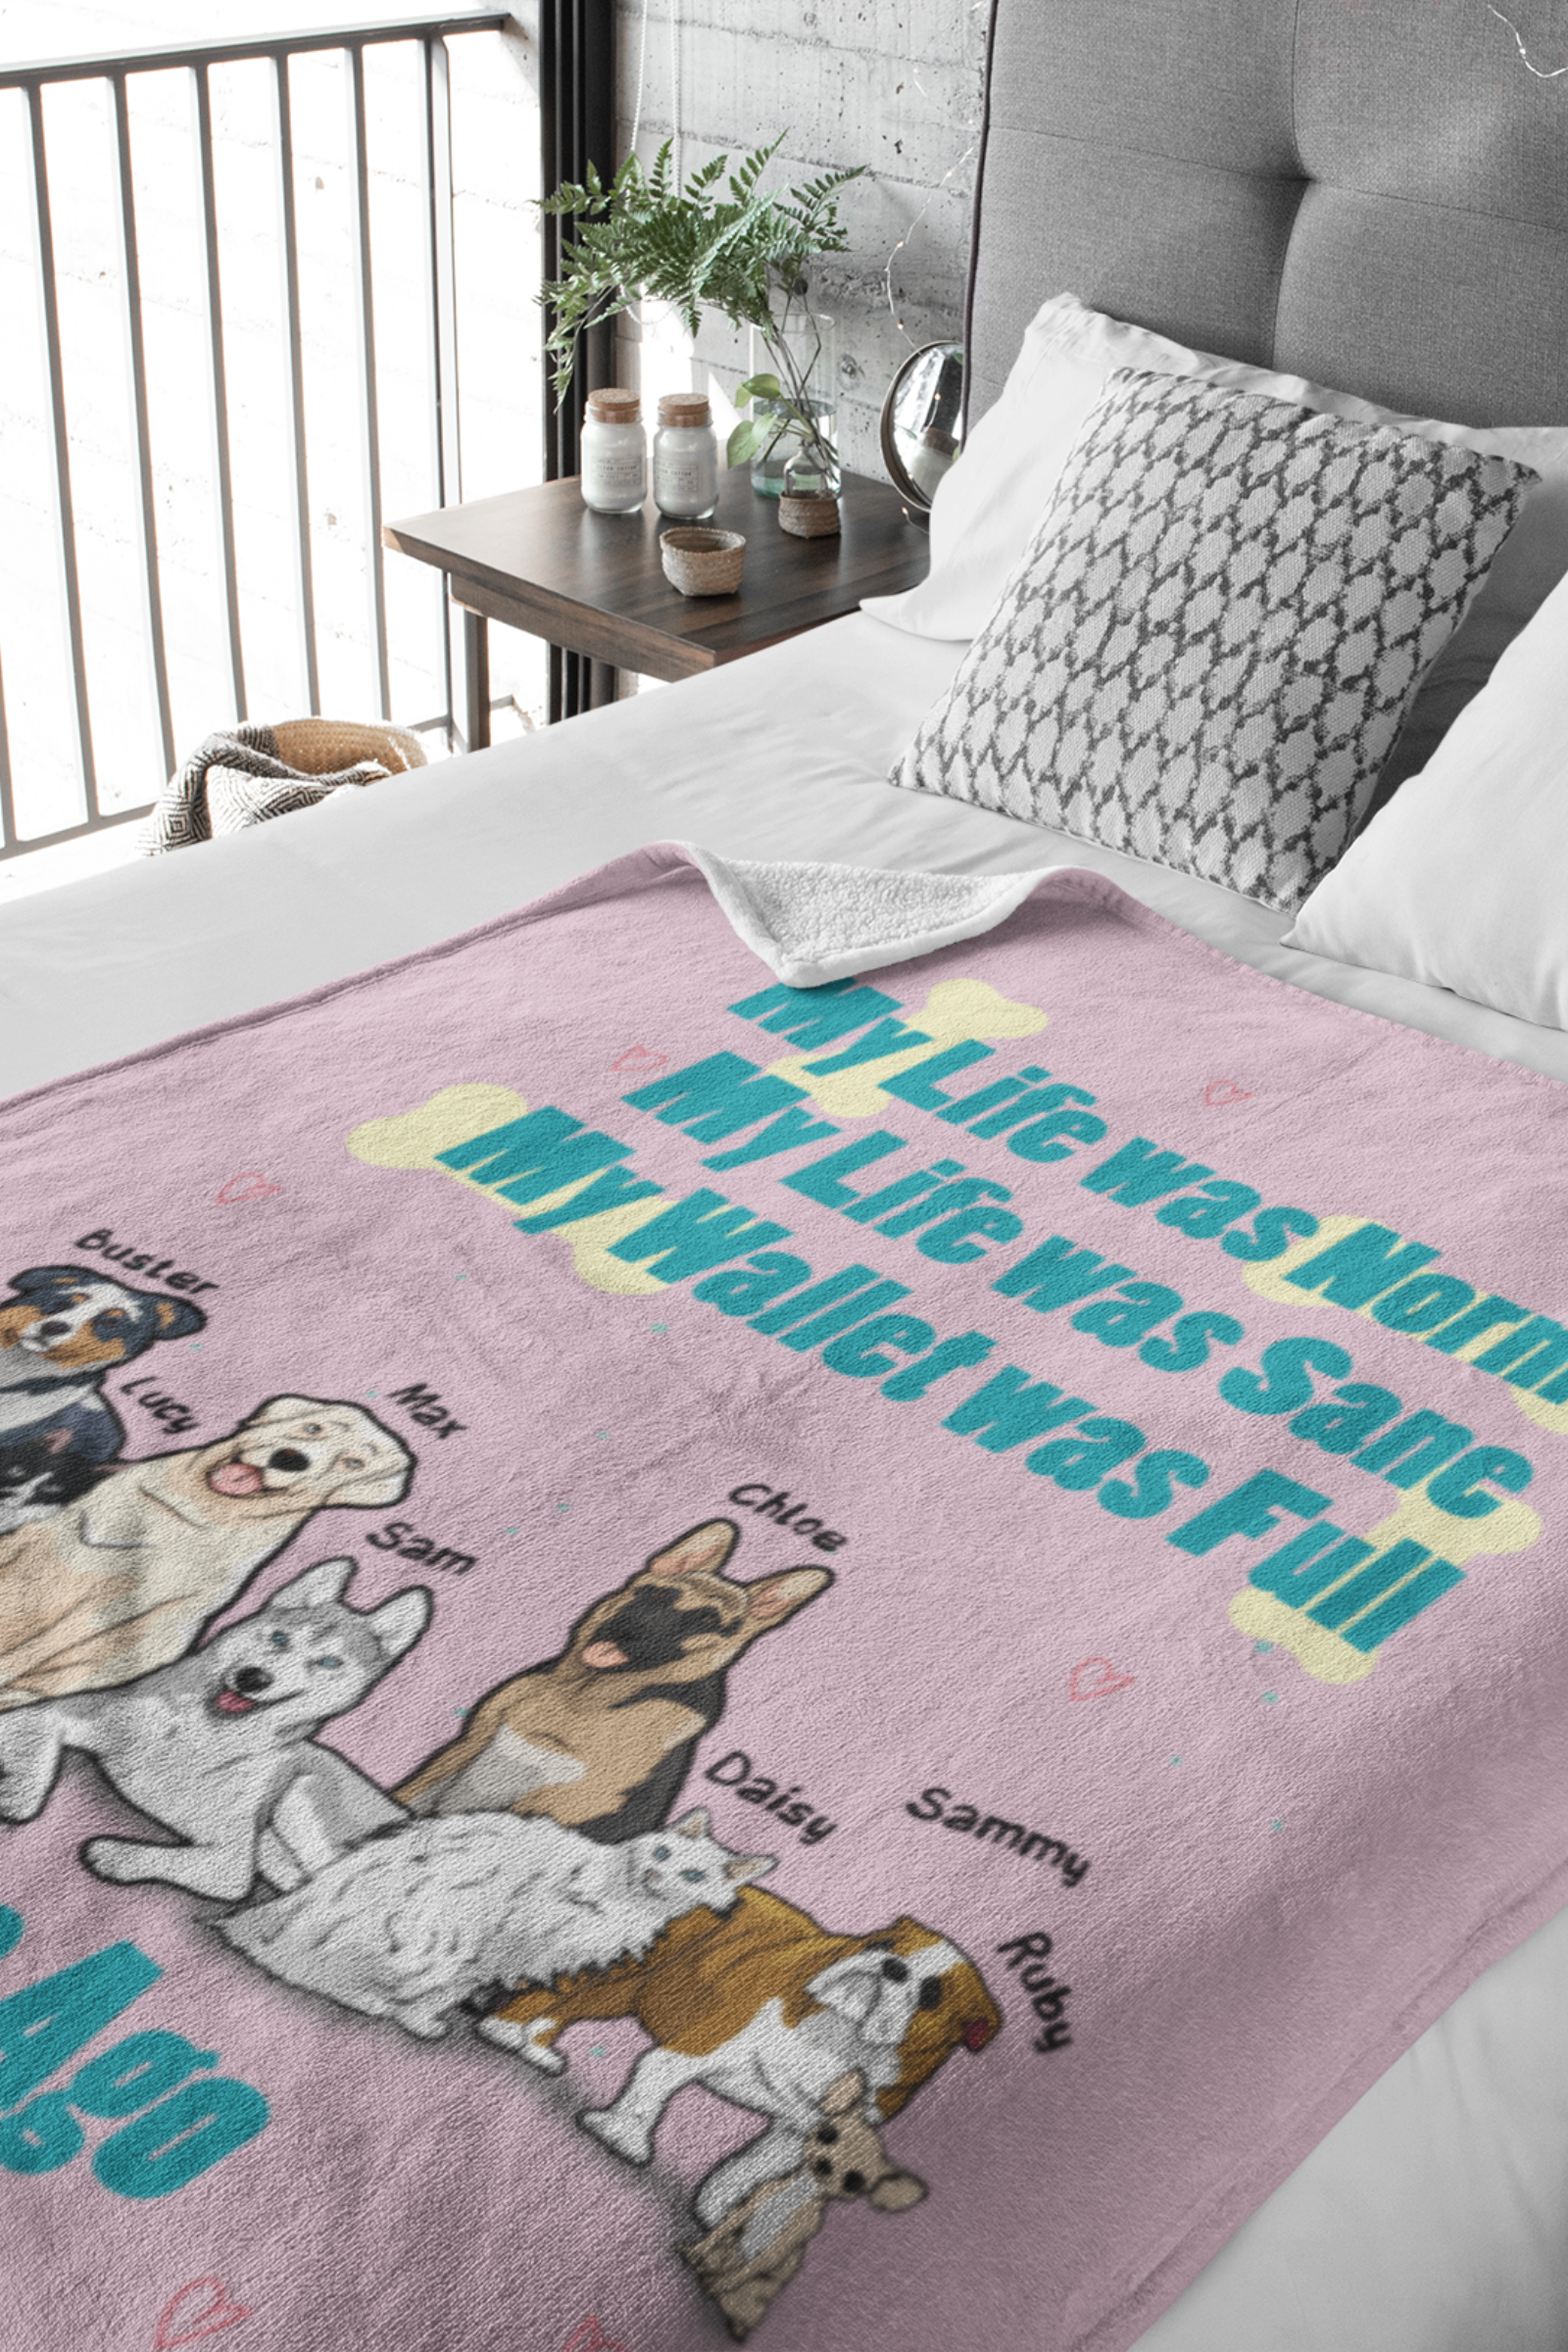 8 Pets Ago Personalized Blanket for Pet Lovers